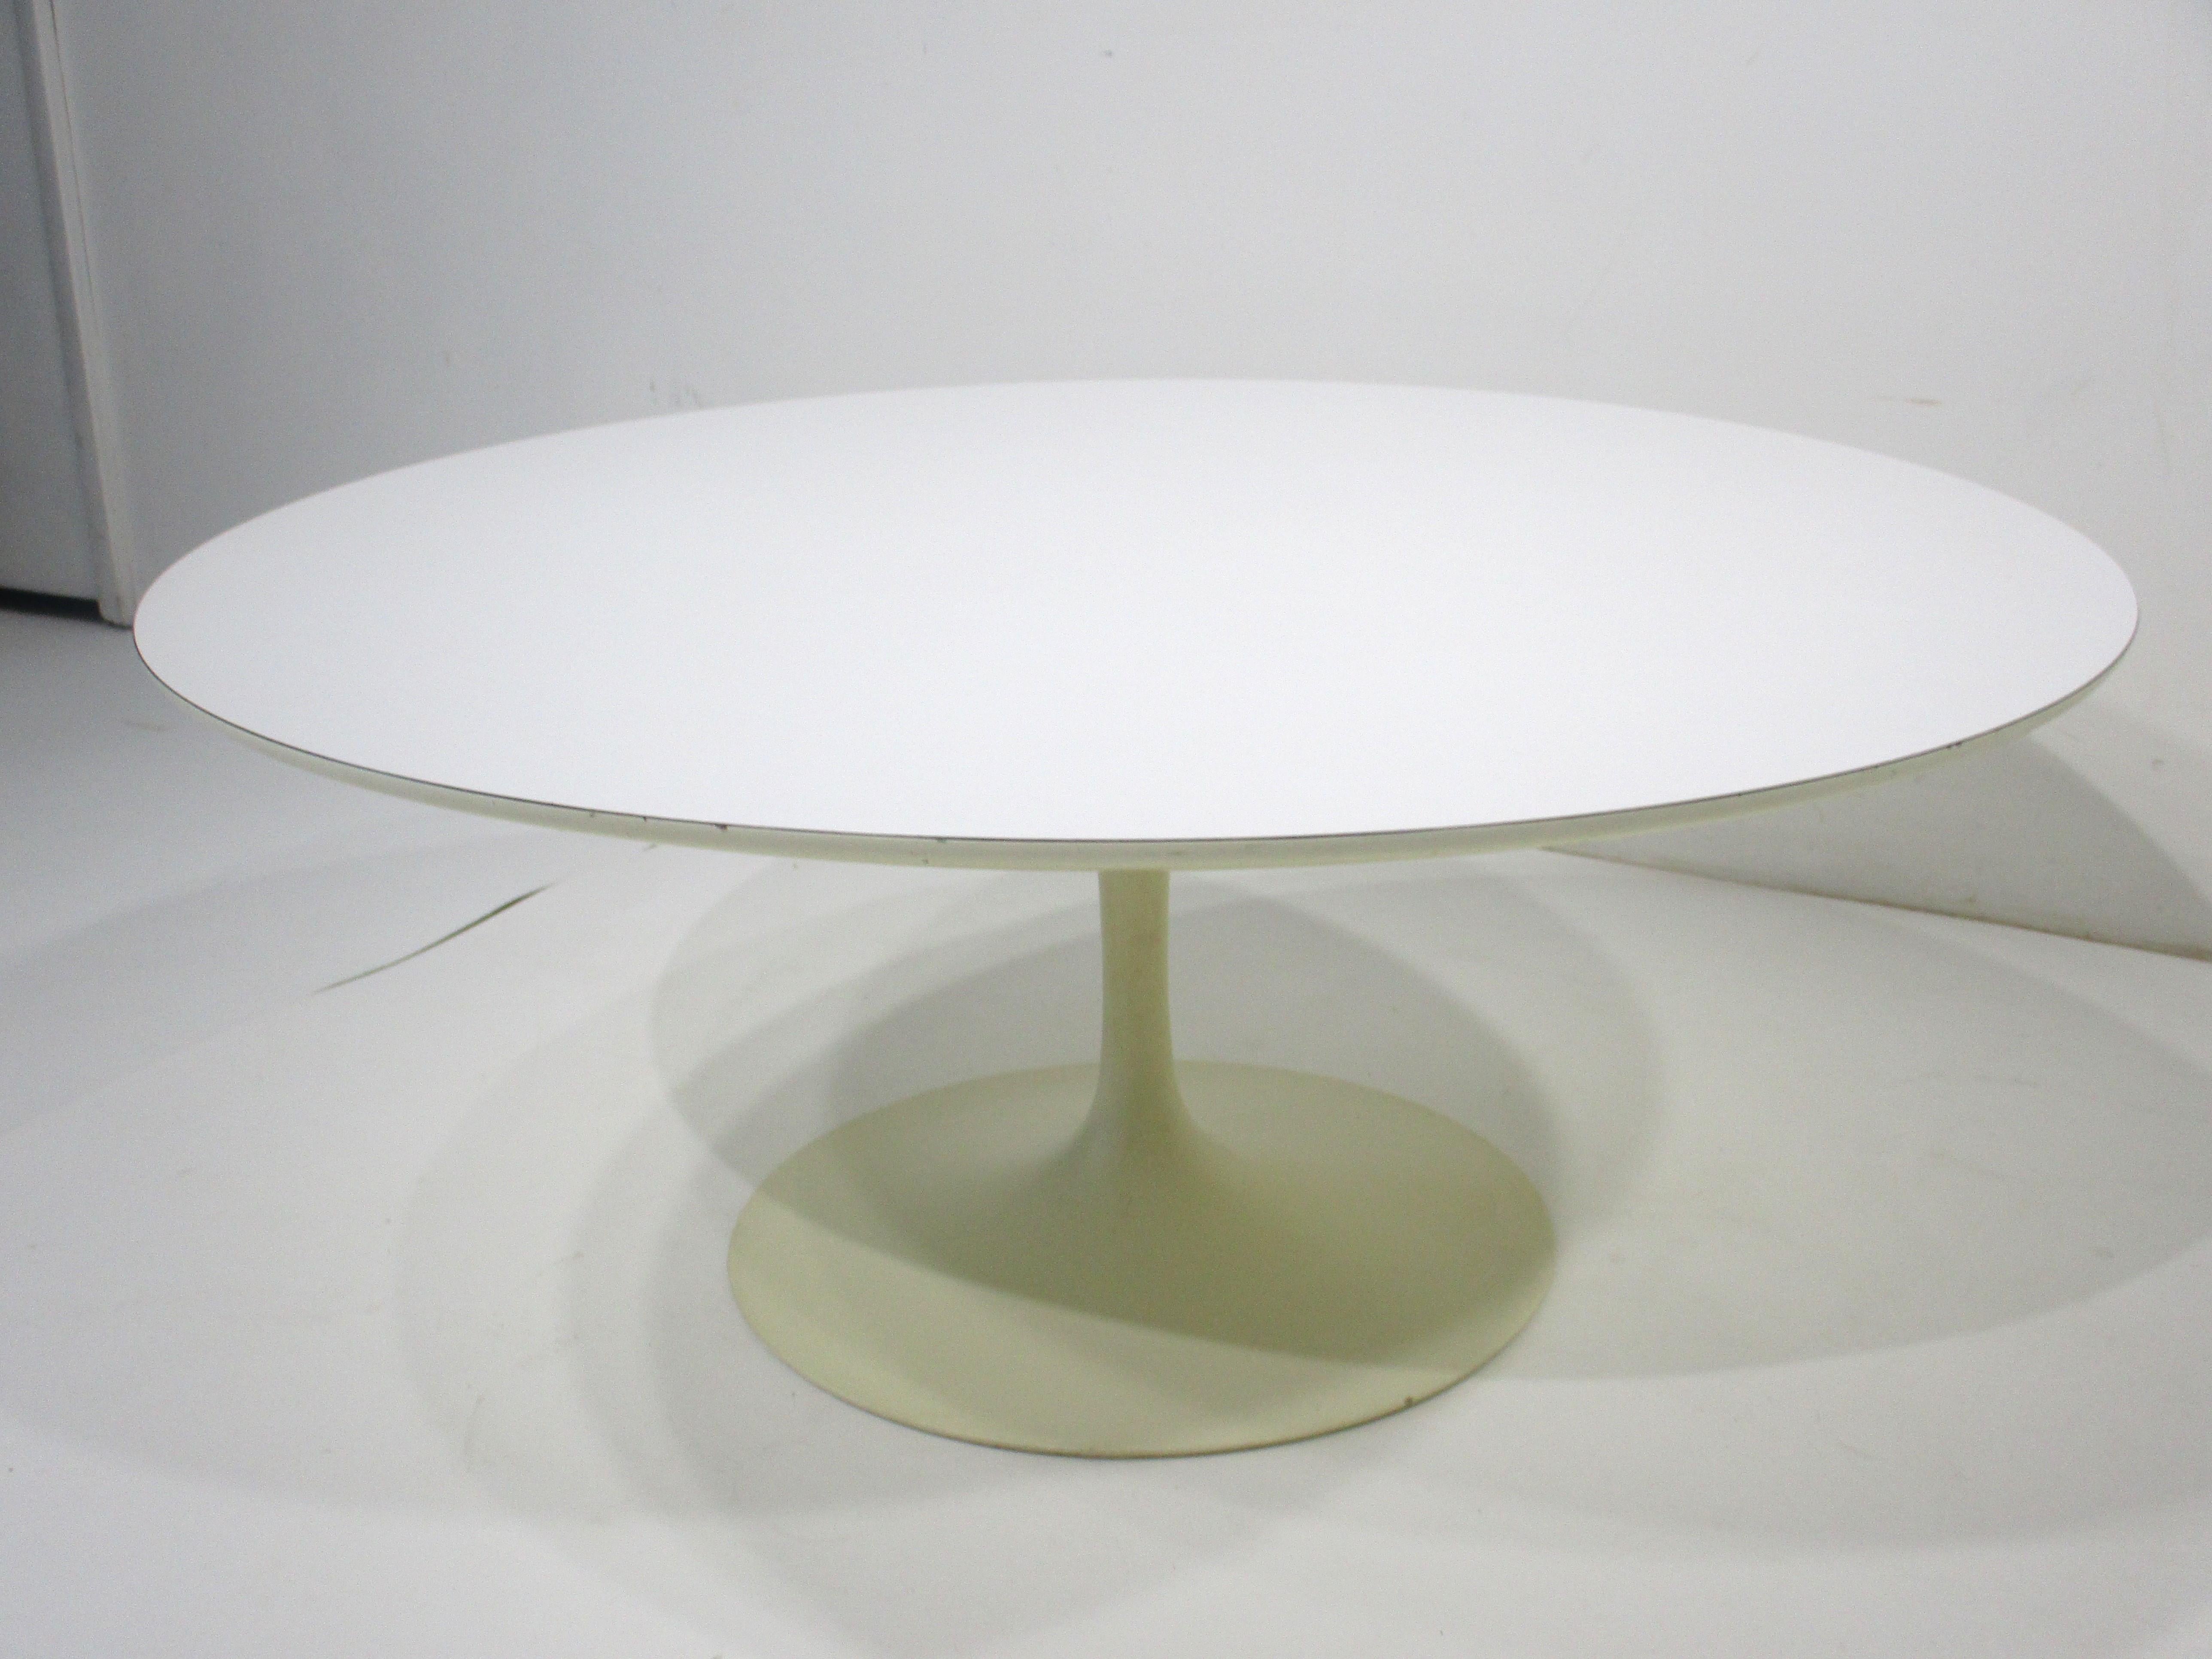 A sculptural white tulip coffee table with steel base and Laminate top by designer , architect and artist Eero Saarinen . This iconic table has been a mainstay of the Mid Century modern design movement since it's inception and is still fresh today .